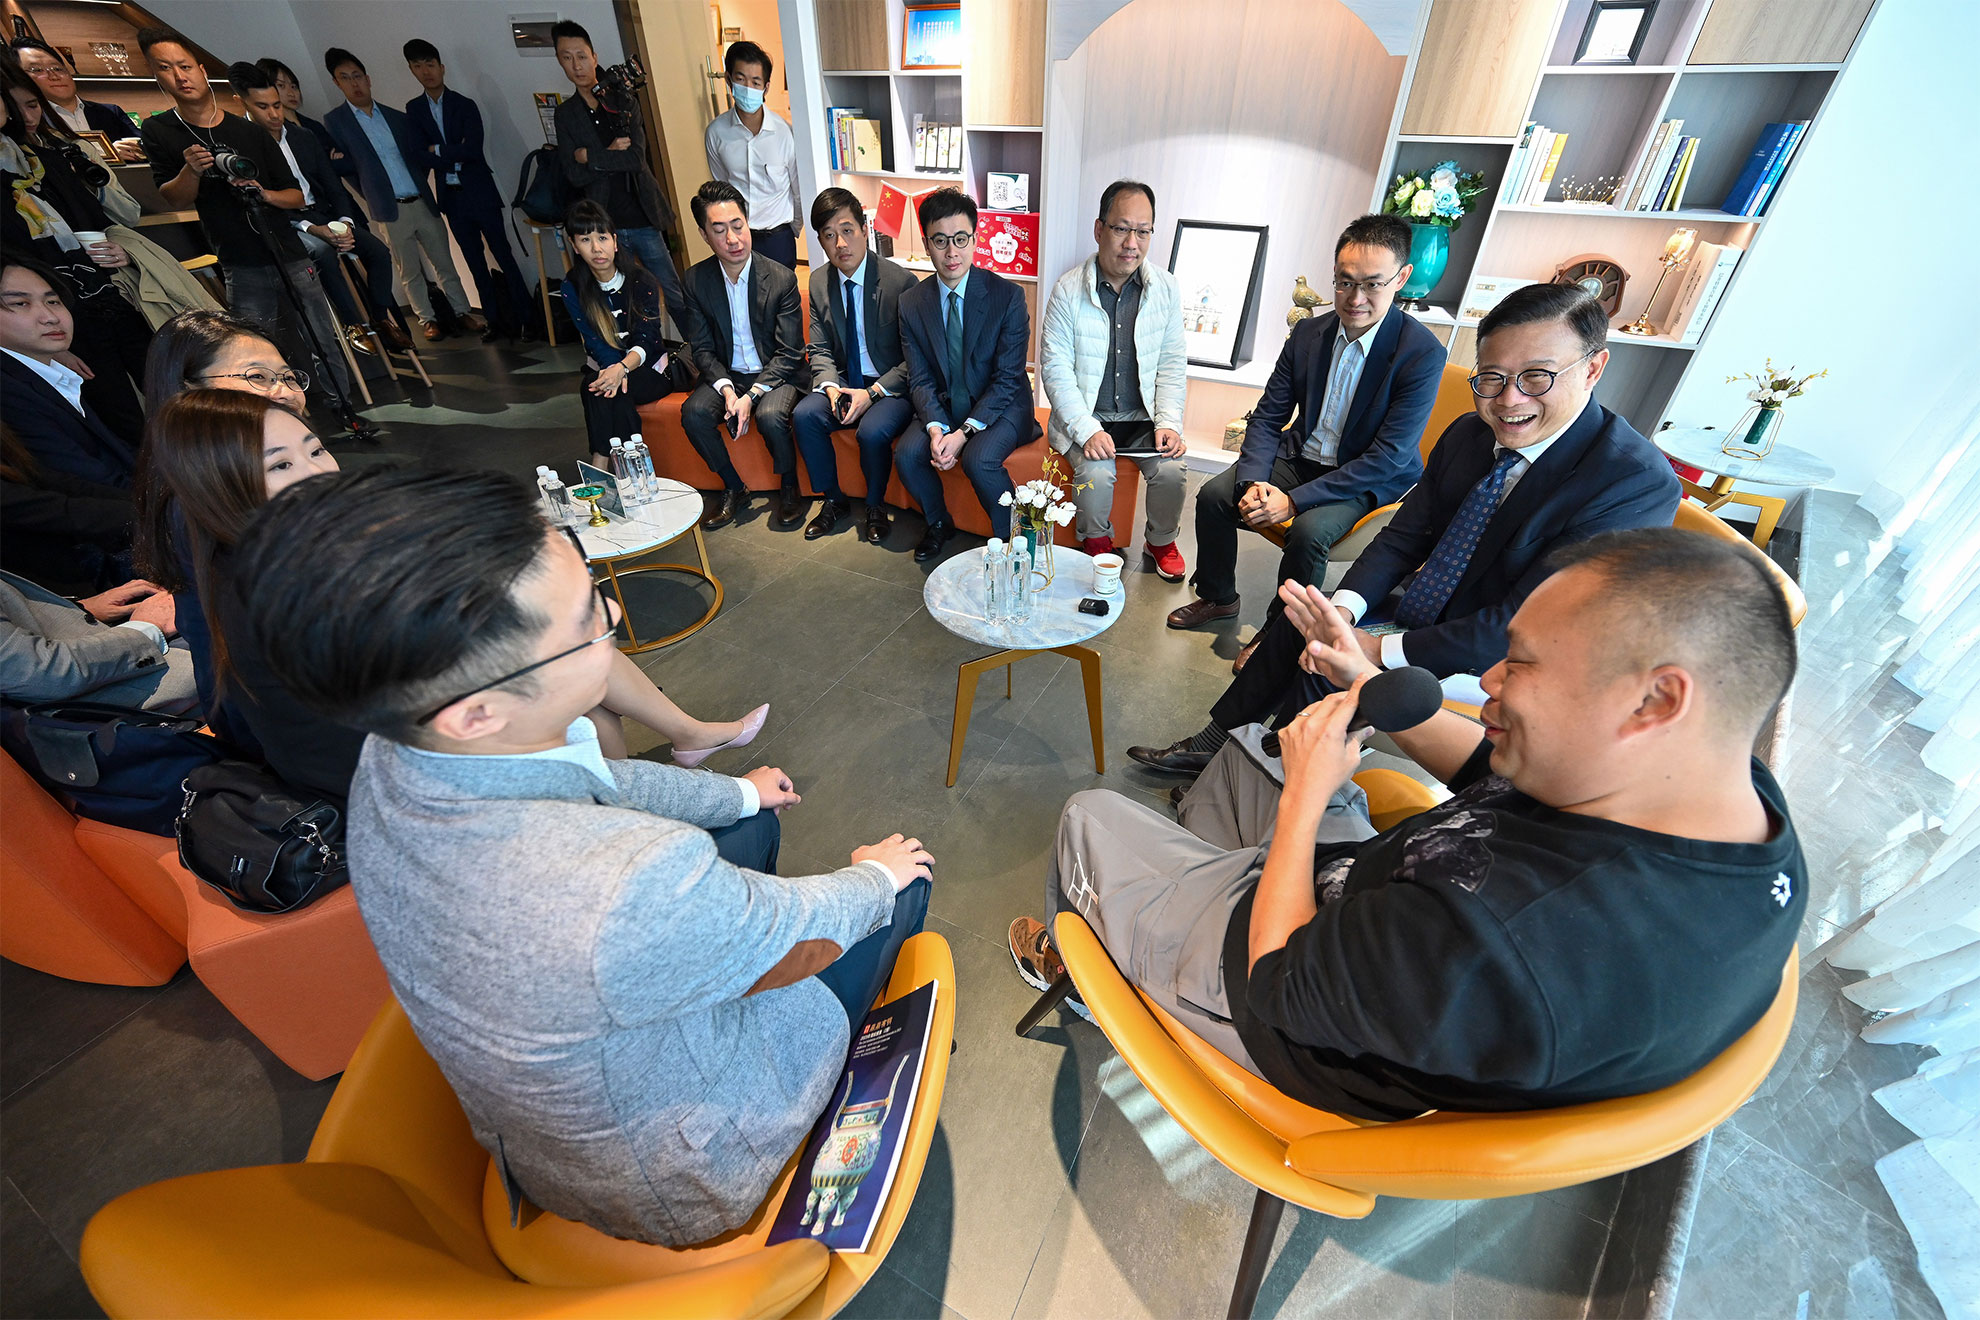 The Deputy Secretary for Justice, Mr Cheung Kwok-kwan (second right) and a delegation of young lawyers led by him today (November 18) visited the Foshan Hong Kong-Macao Youth Entrepreneurship Center where an entrepreneur shares his start-up experience.